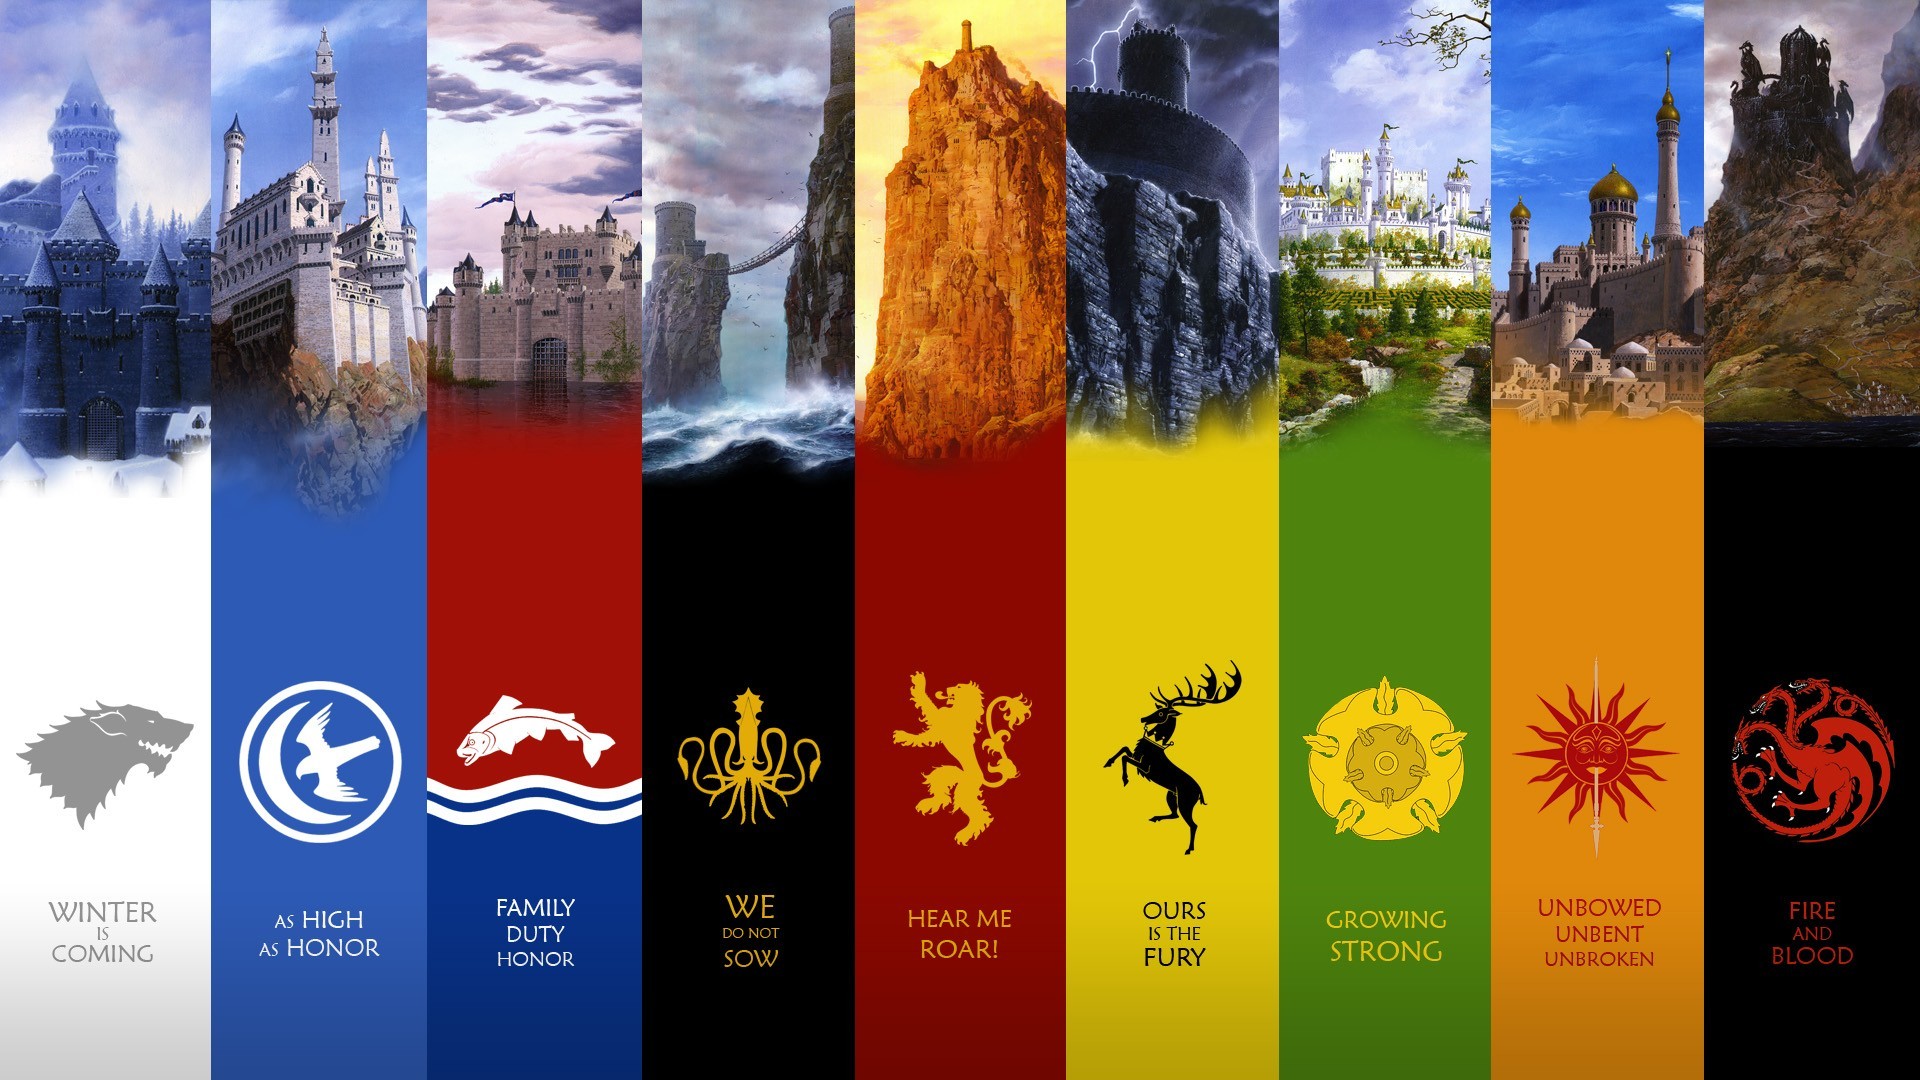 General 1920x1080 Game of Thrones sigils quote castle panels literature collage A Song of Ice and Fire TV series